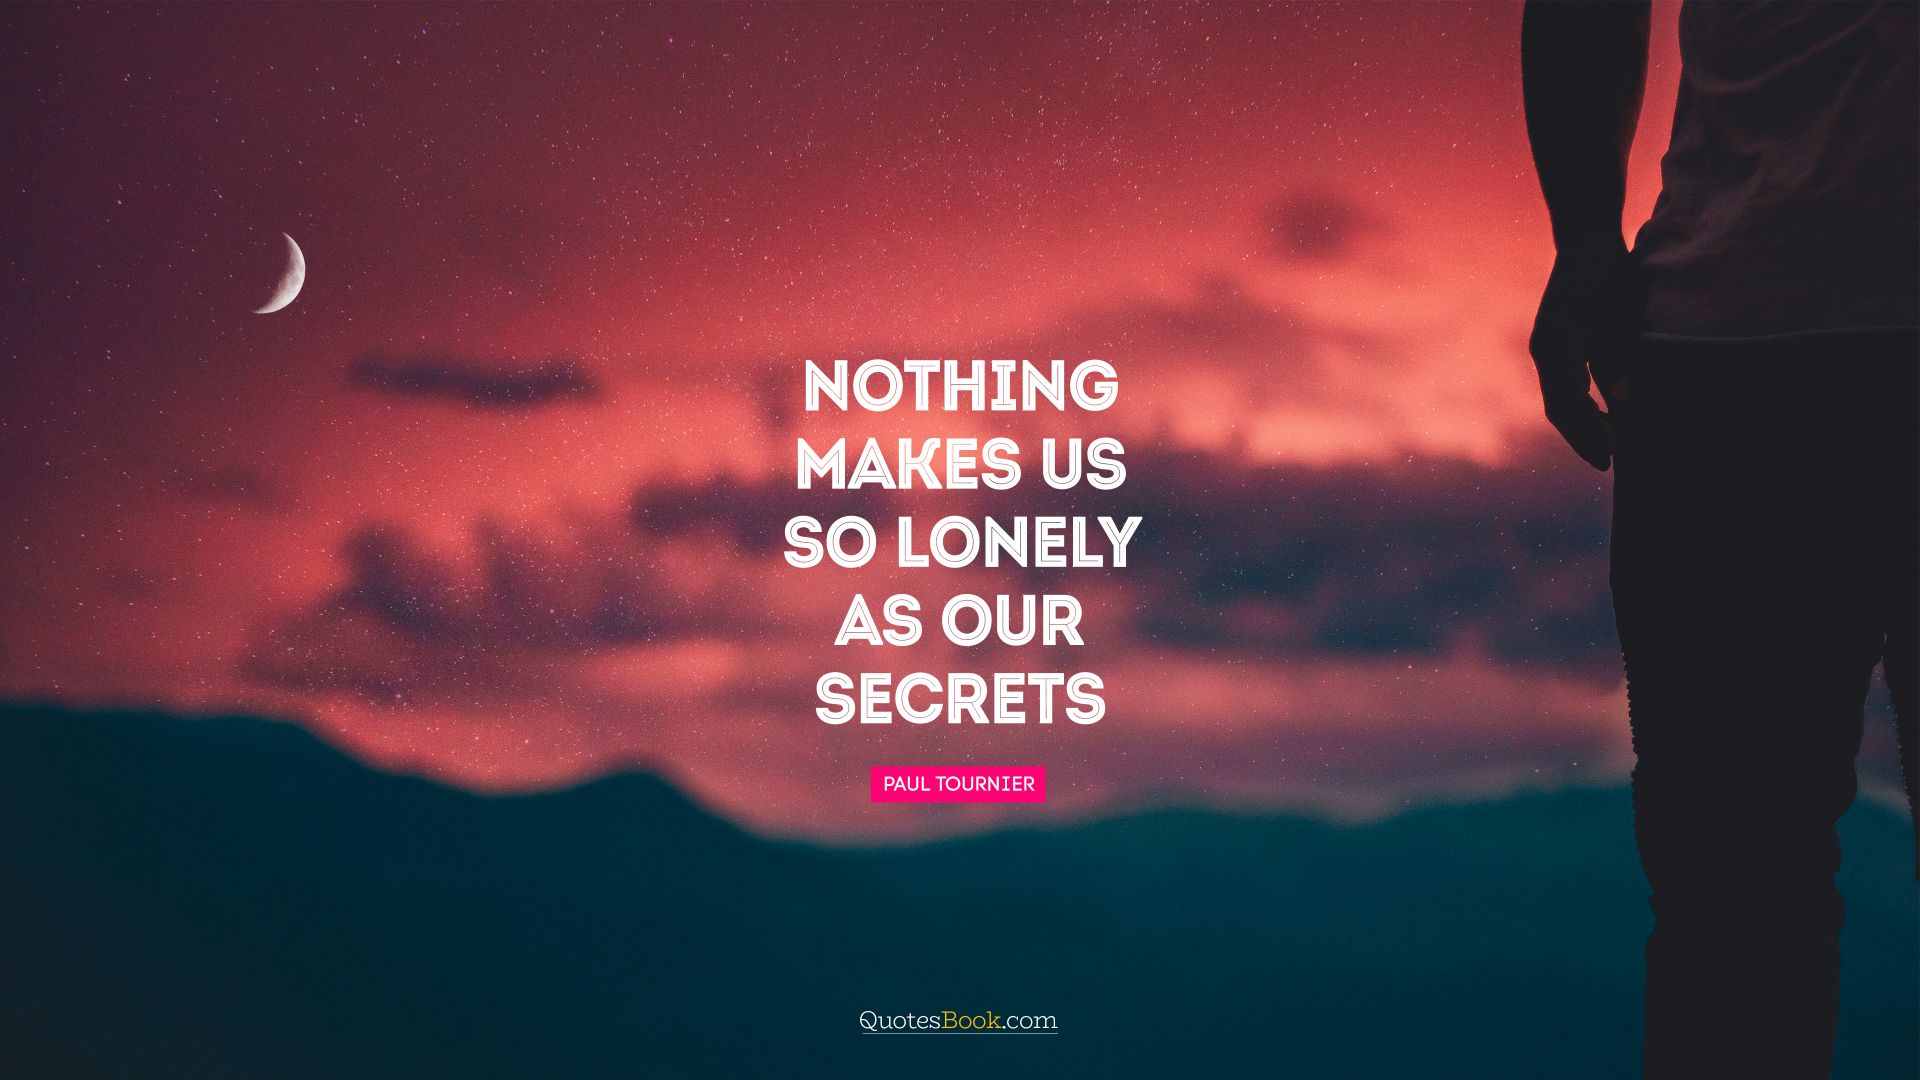 Nothing makes us so lonely as our secrets. - Quote by Paul Tournier